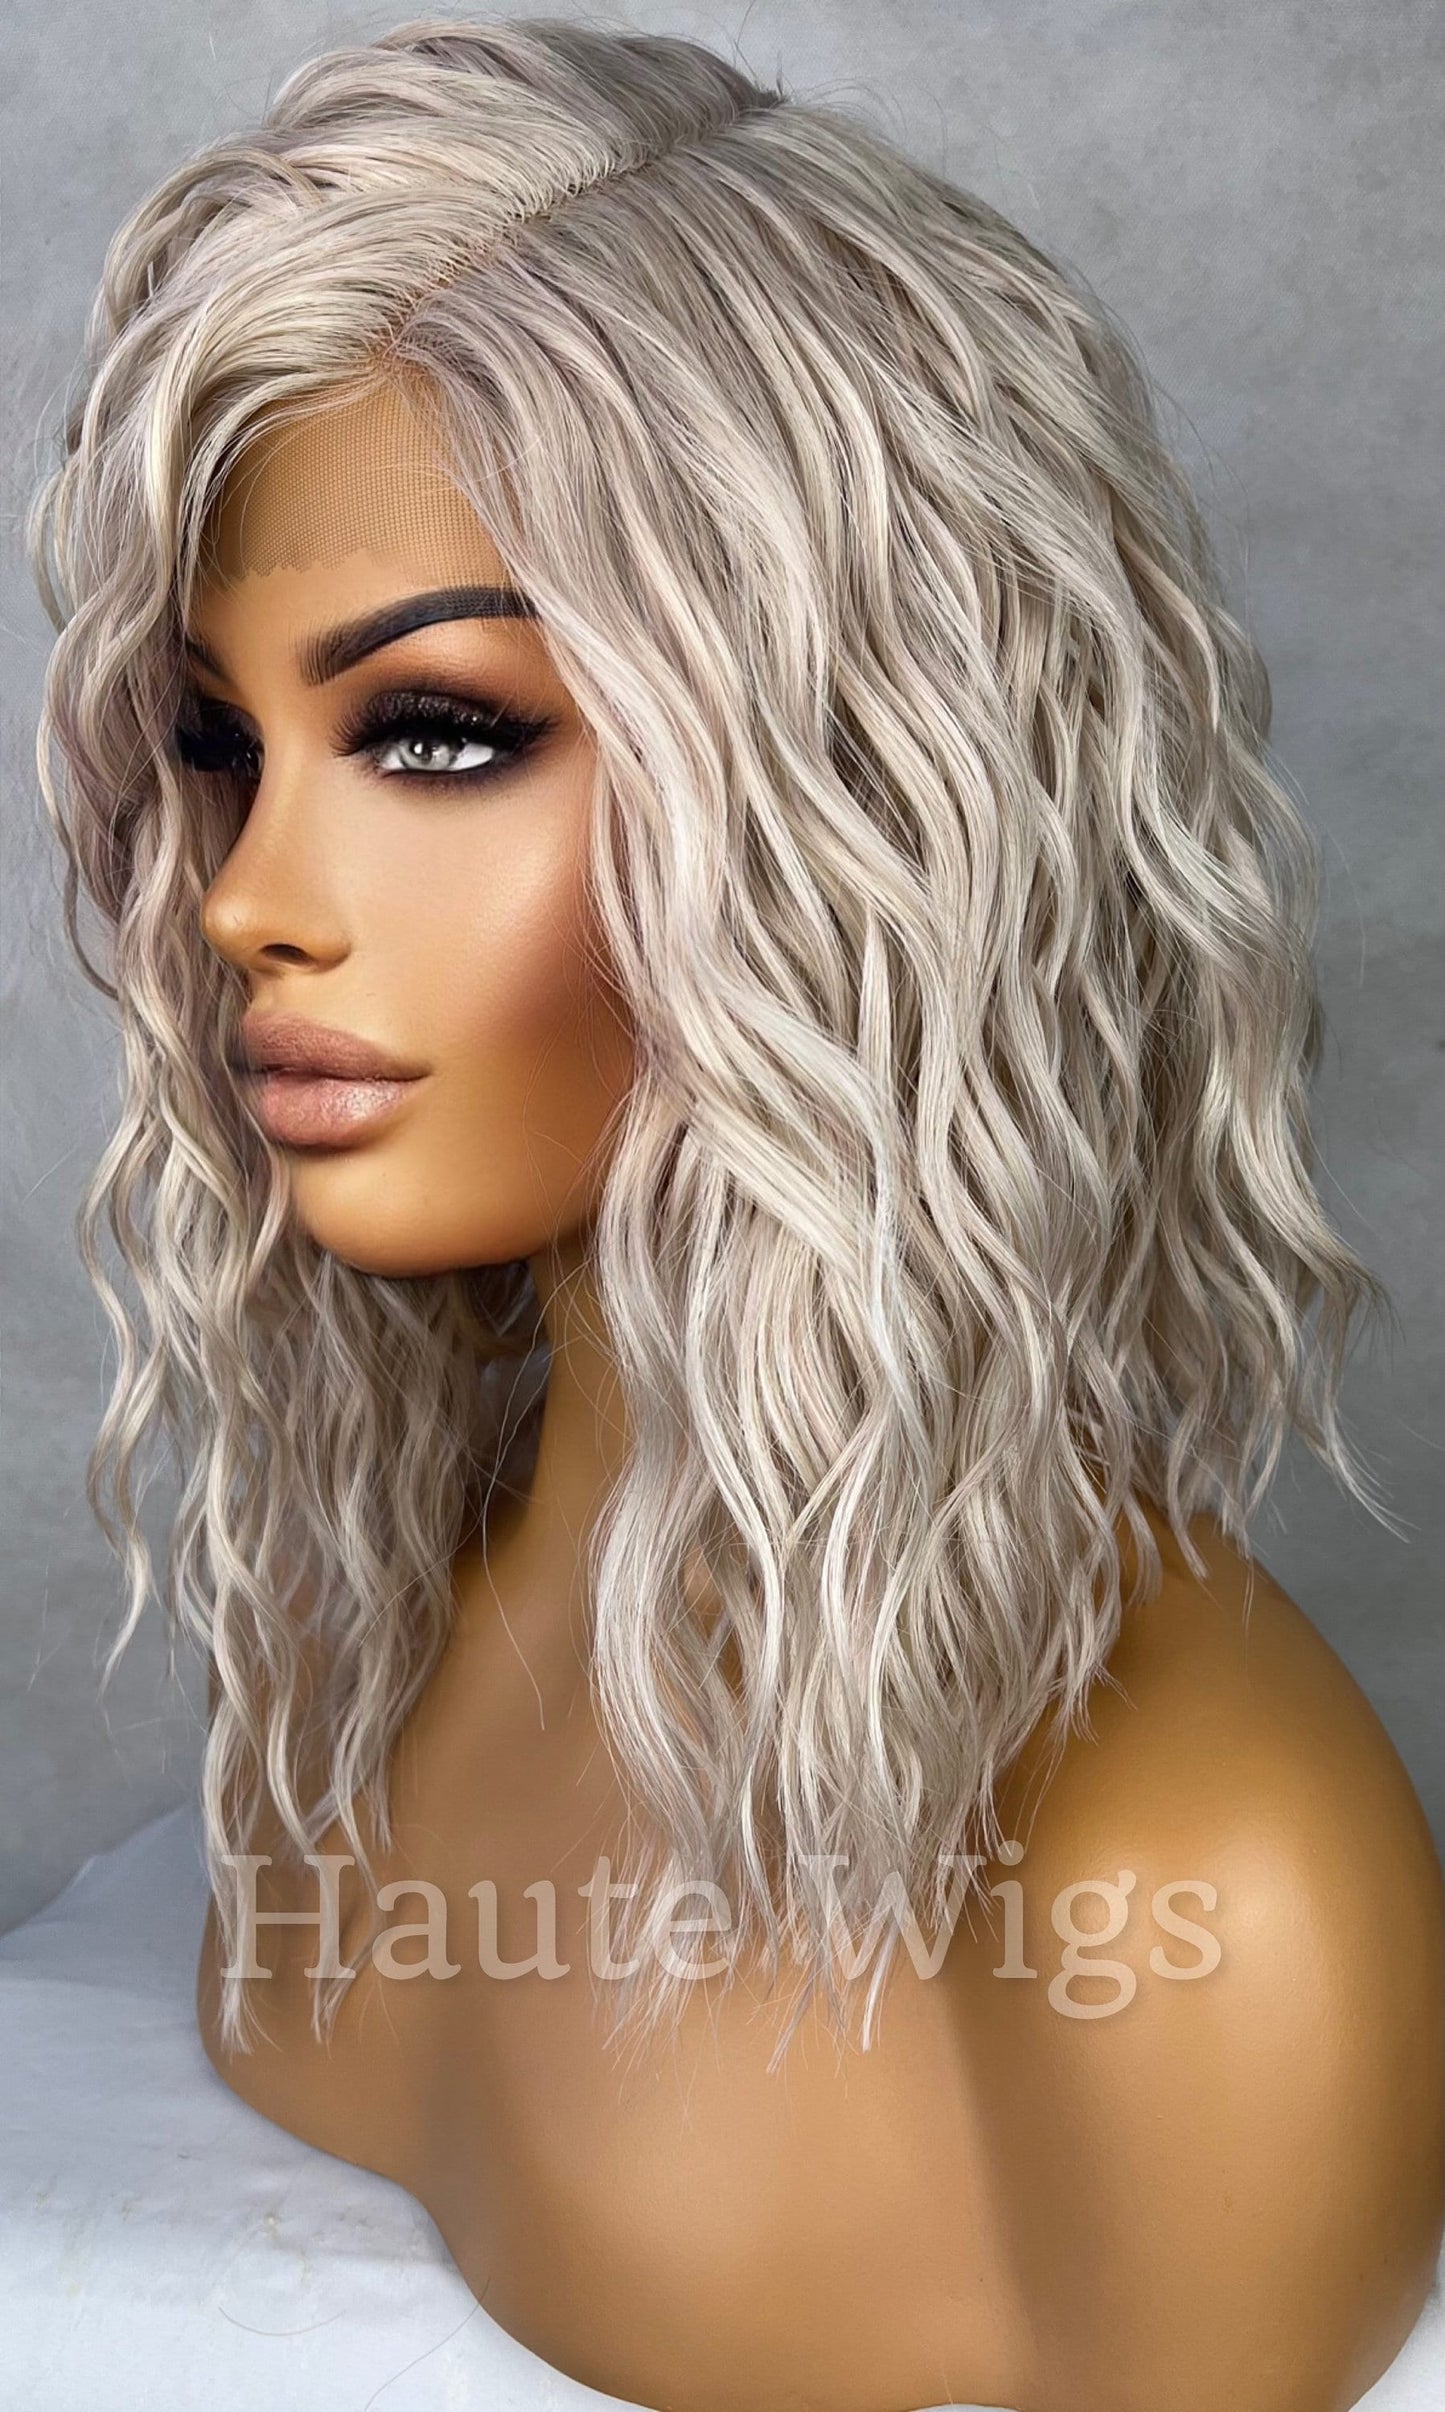 Striking - Wavy 14 inch BOB Platinum White Silver Ash Blonde Wig Side Parting Womens HD Lace Front Realistic Human Hair Blend Ladies Gift